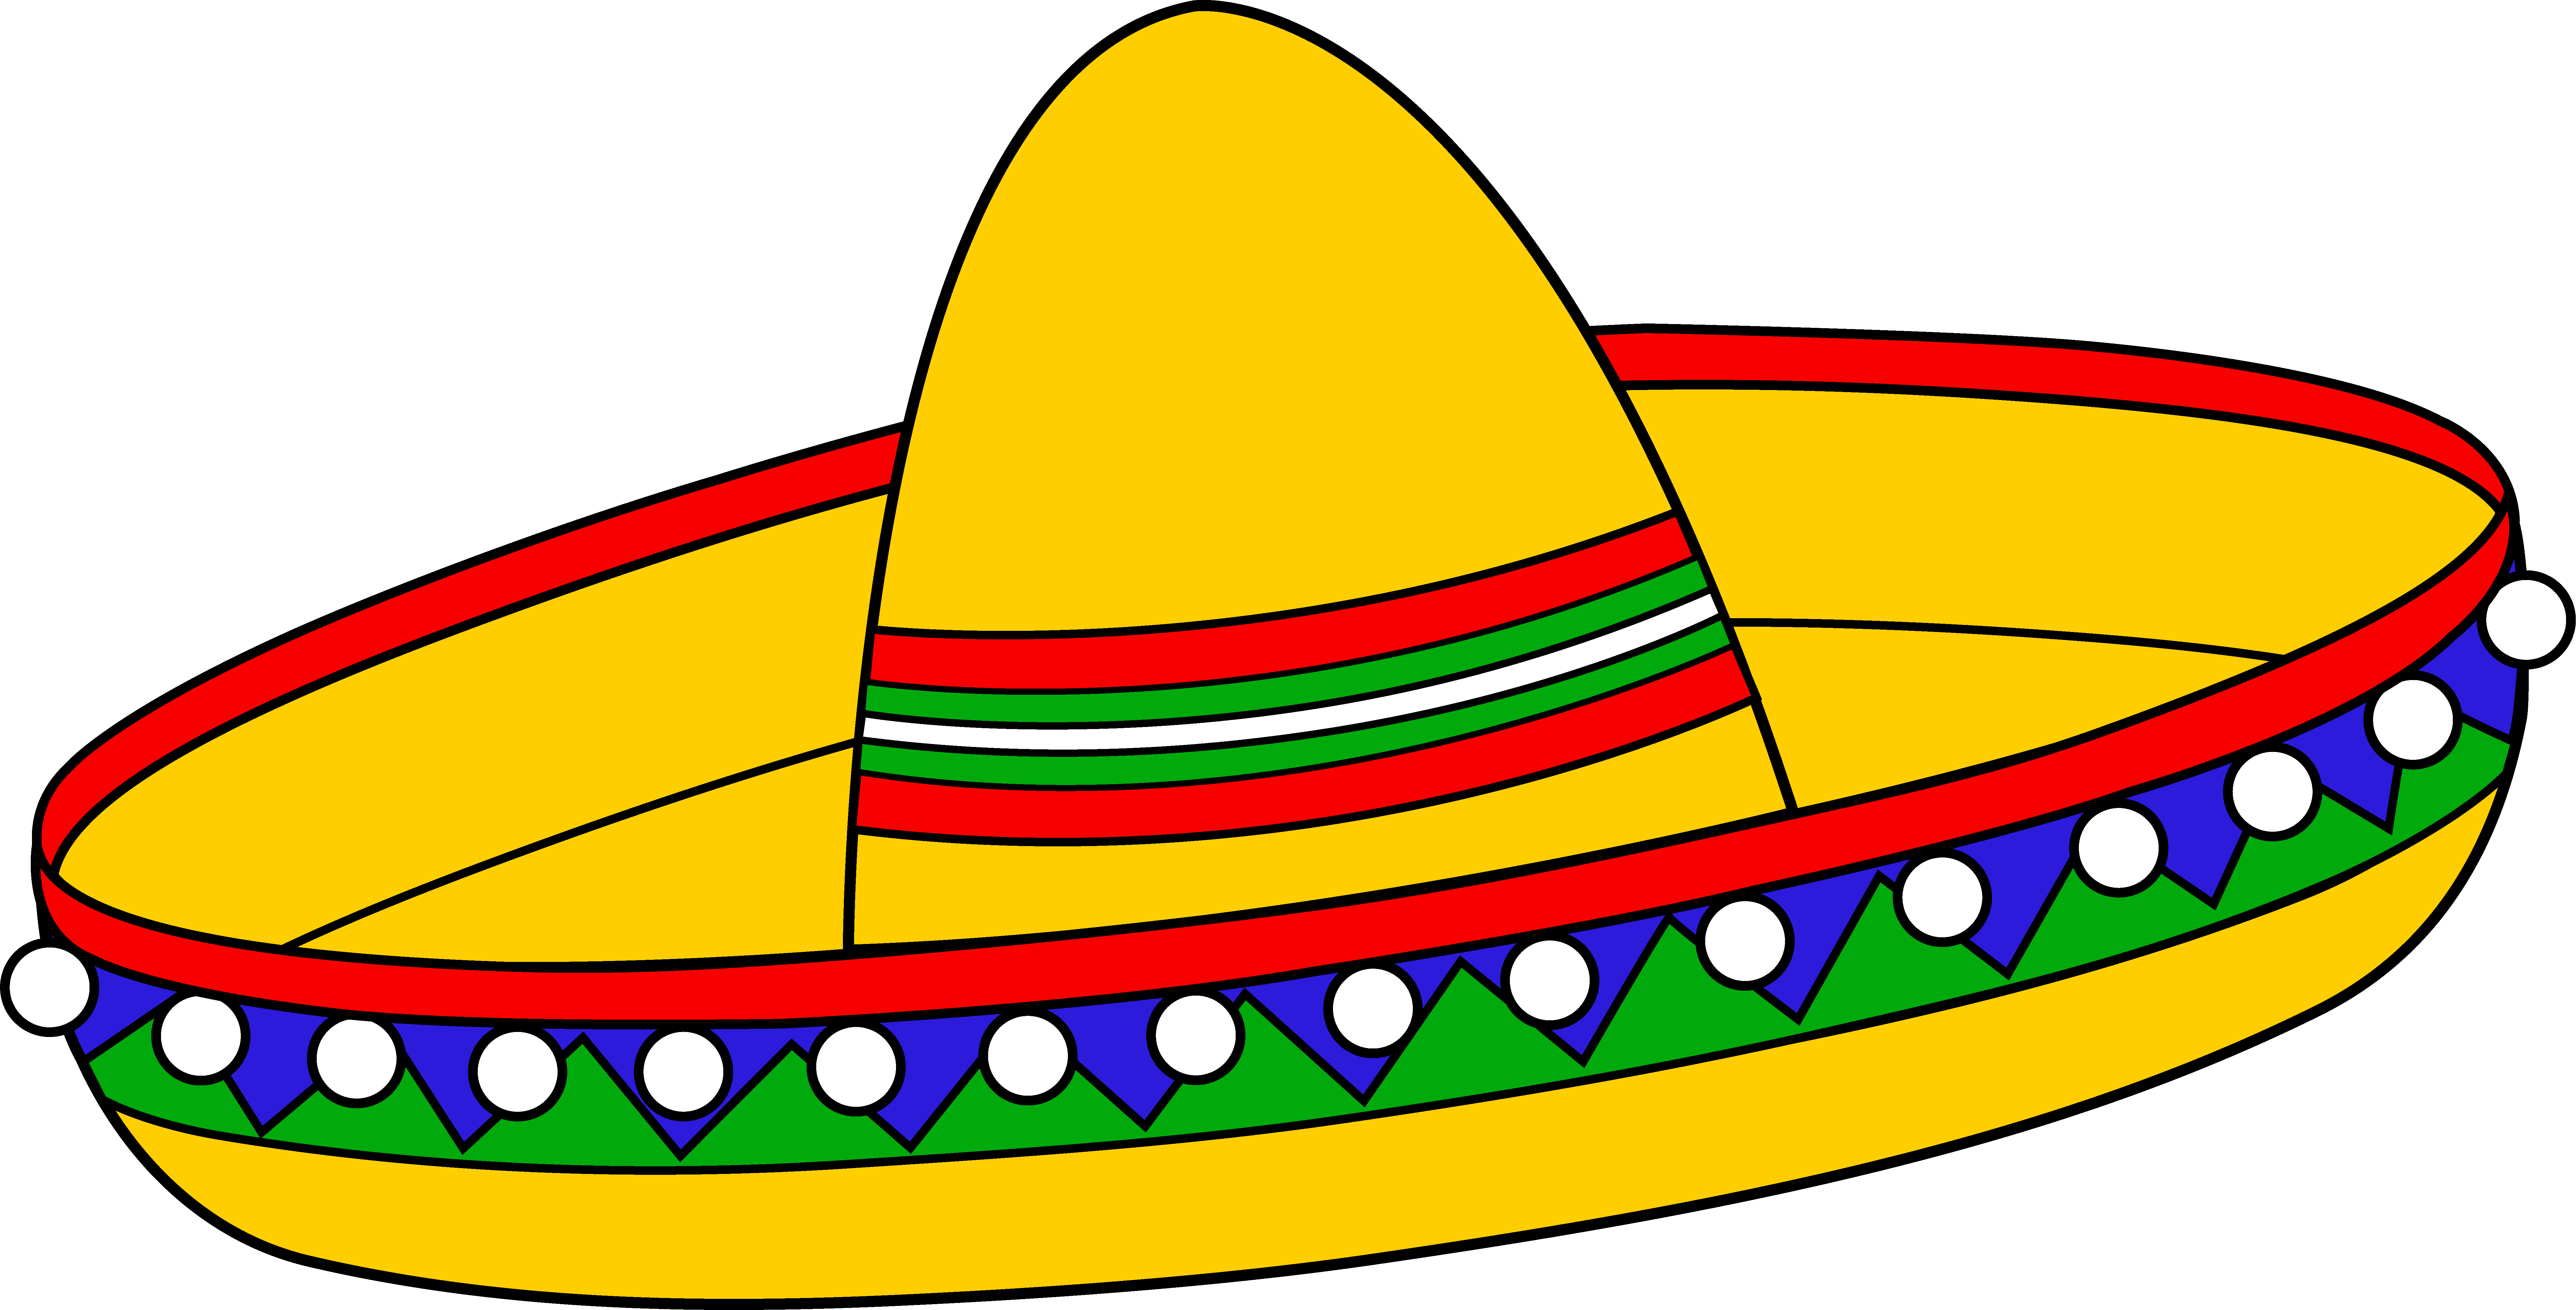 Colorful mexican sombrero hat. Instruments clipart egg shaker